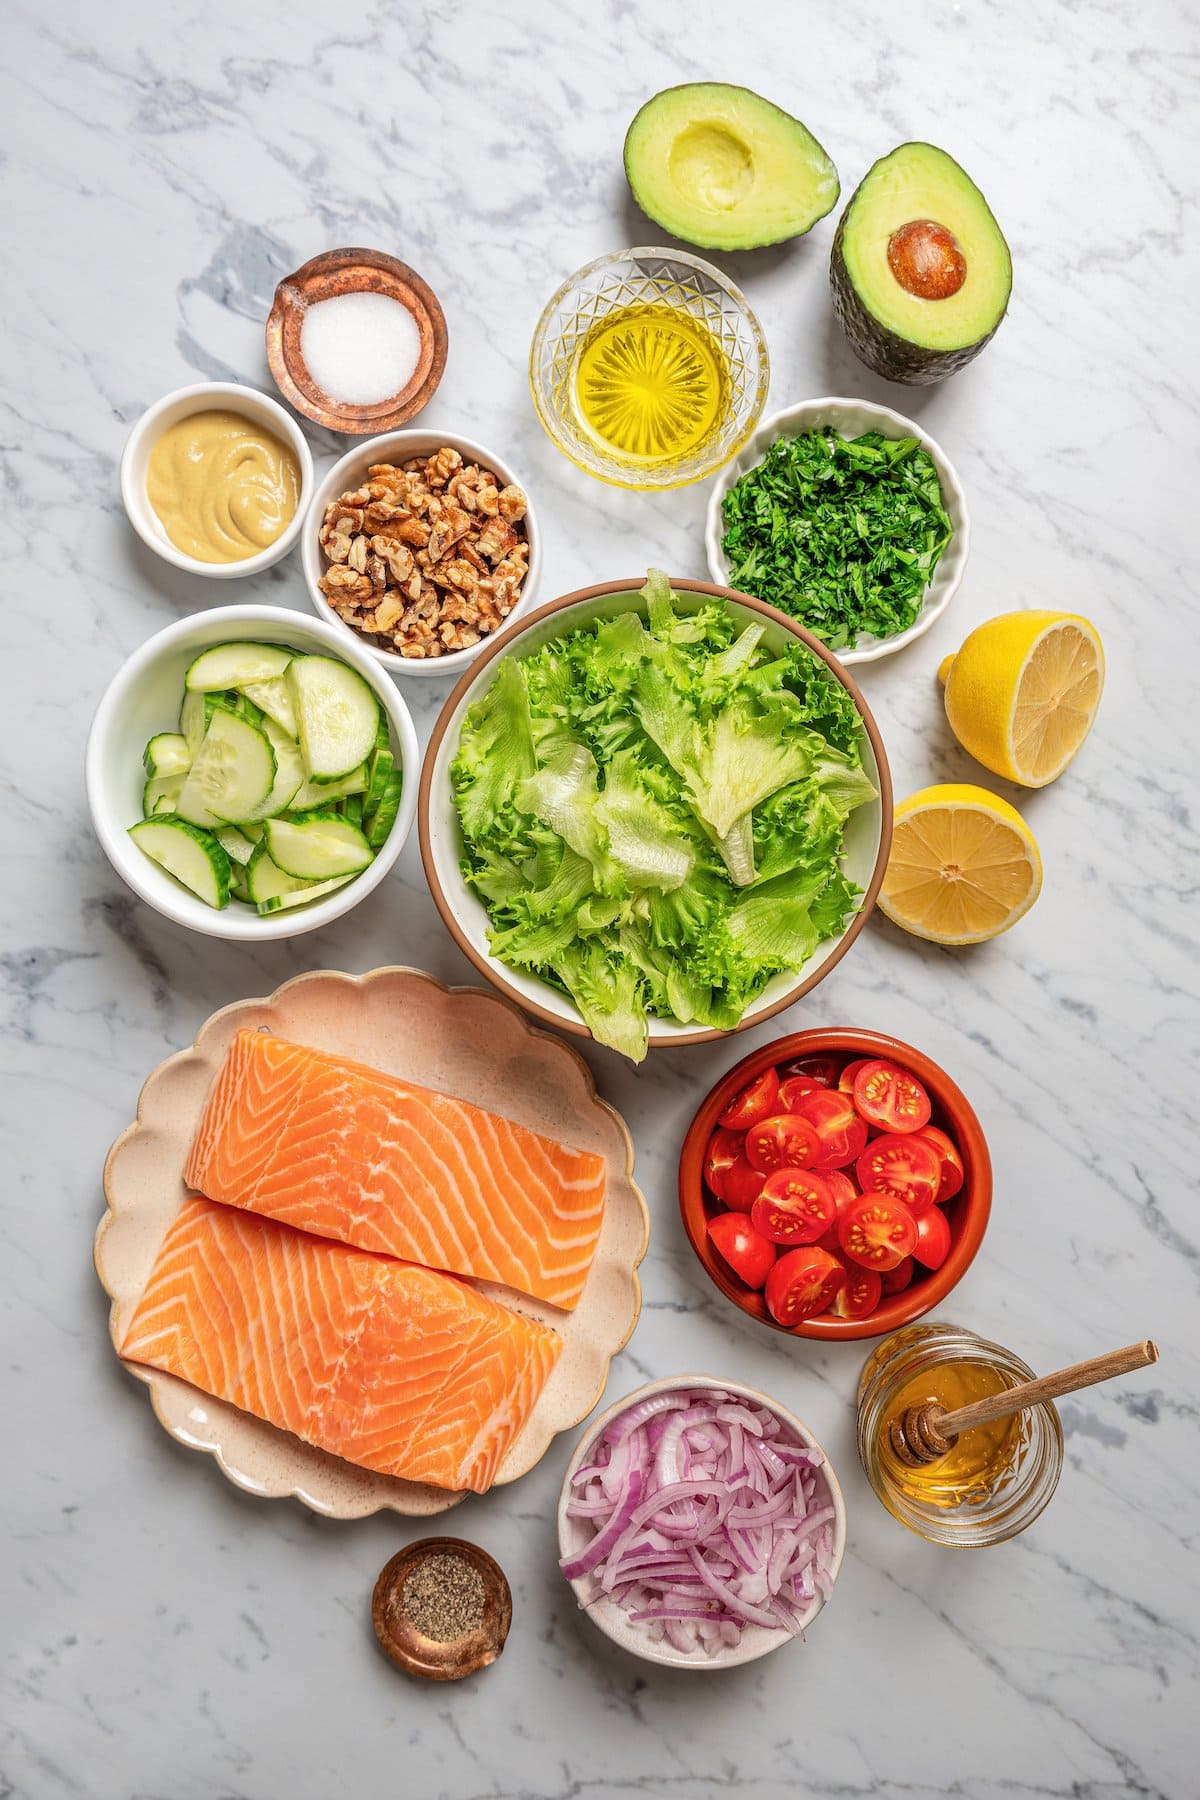 Ingredients for chopped salmon salad.